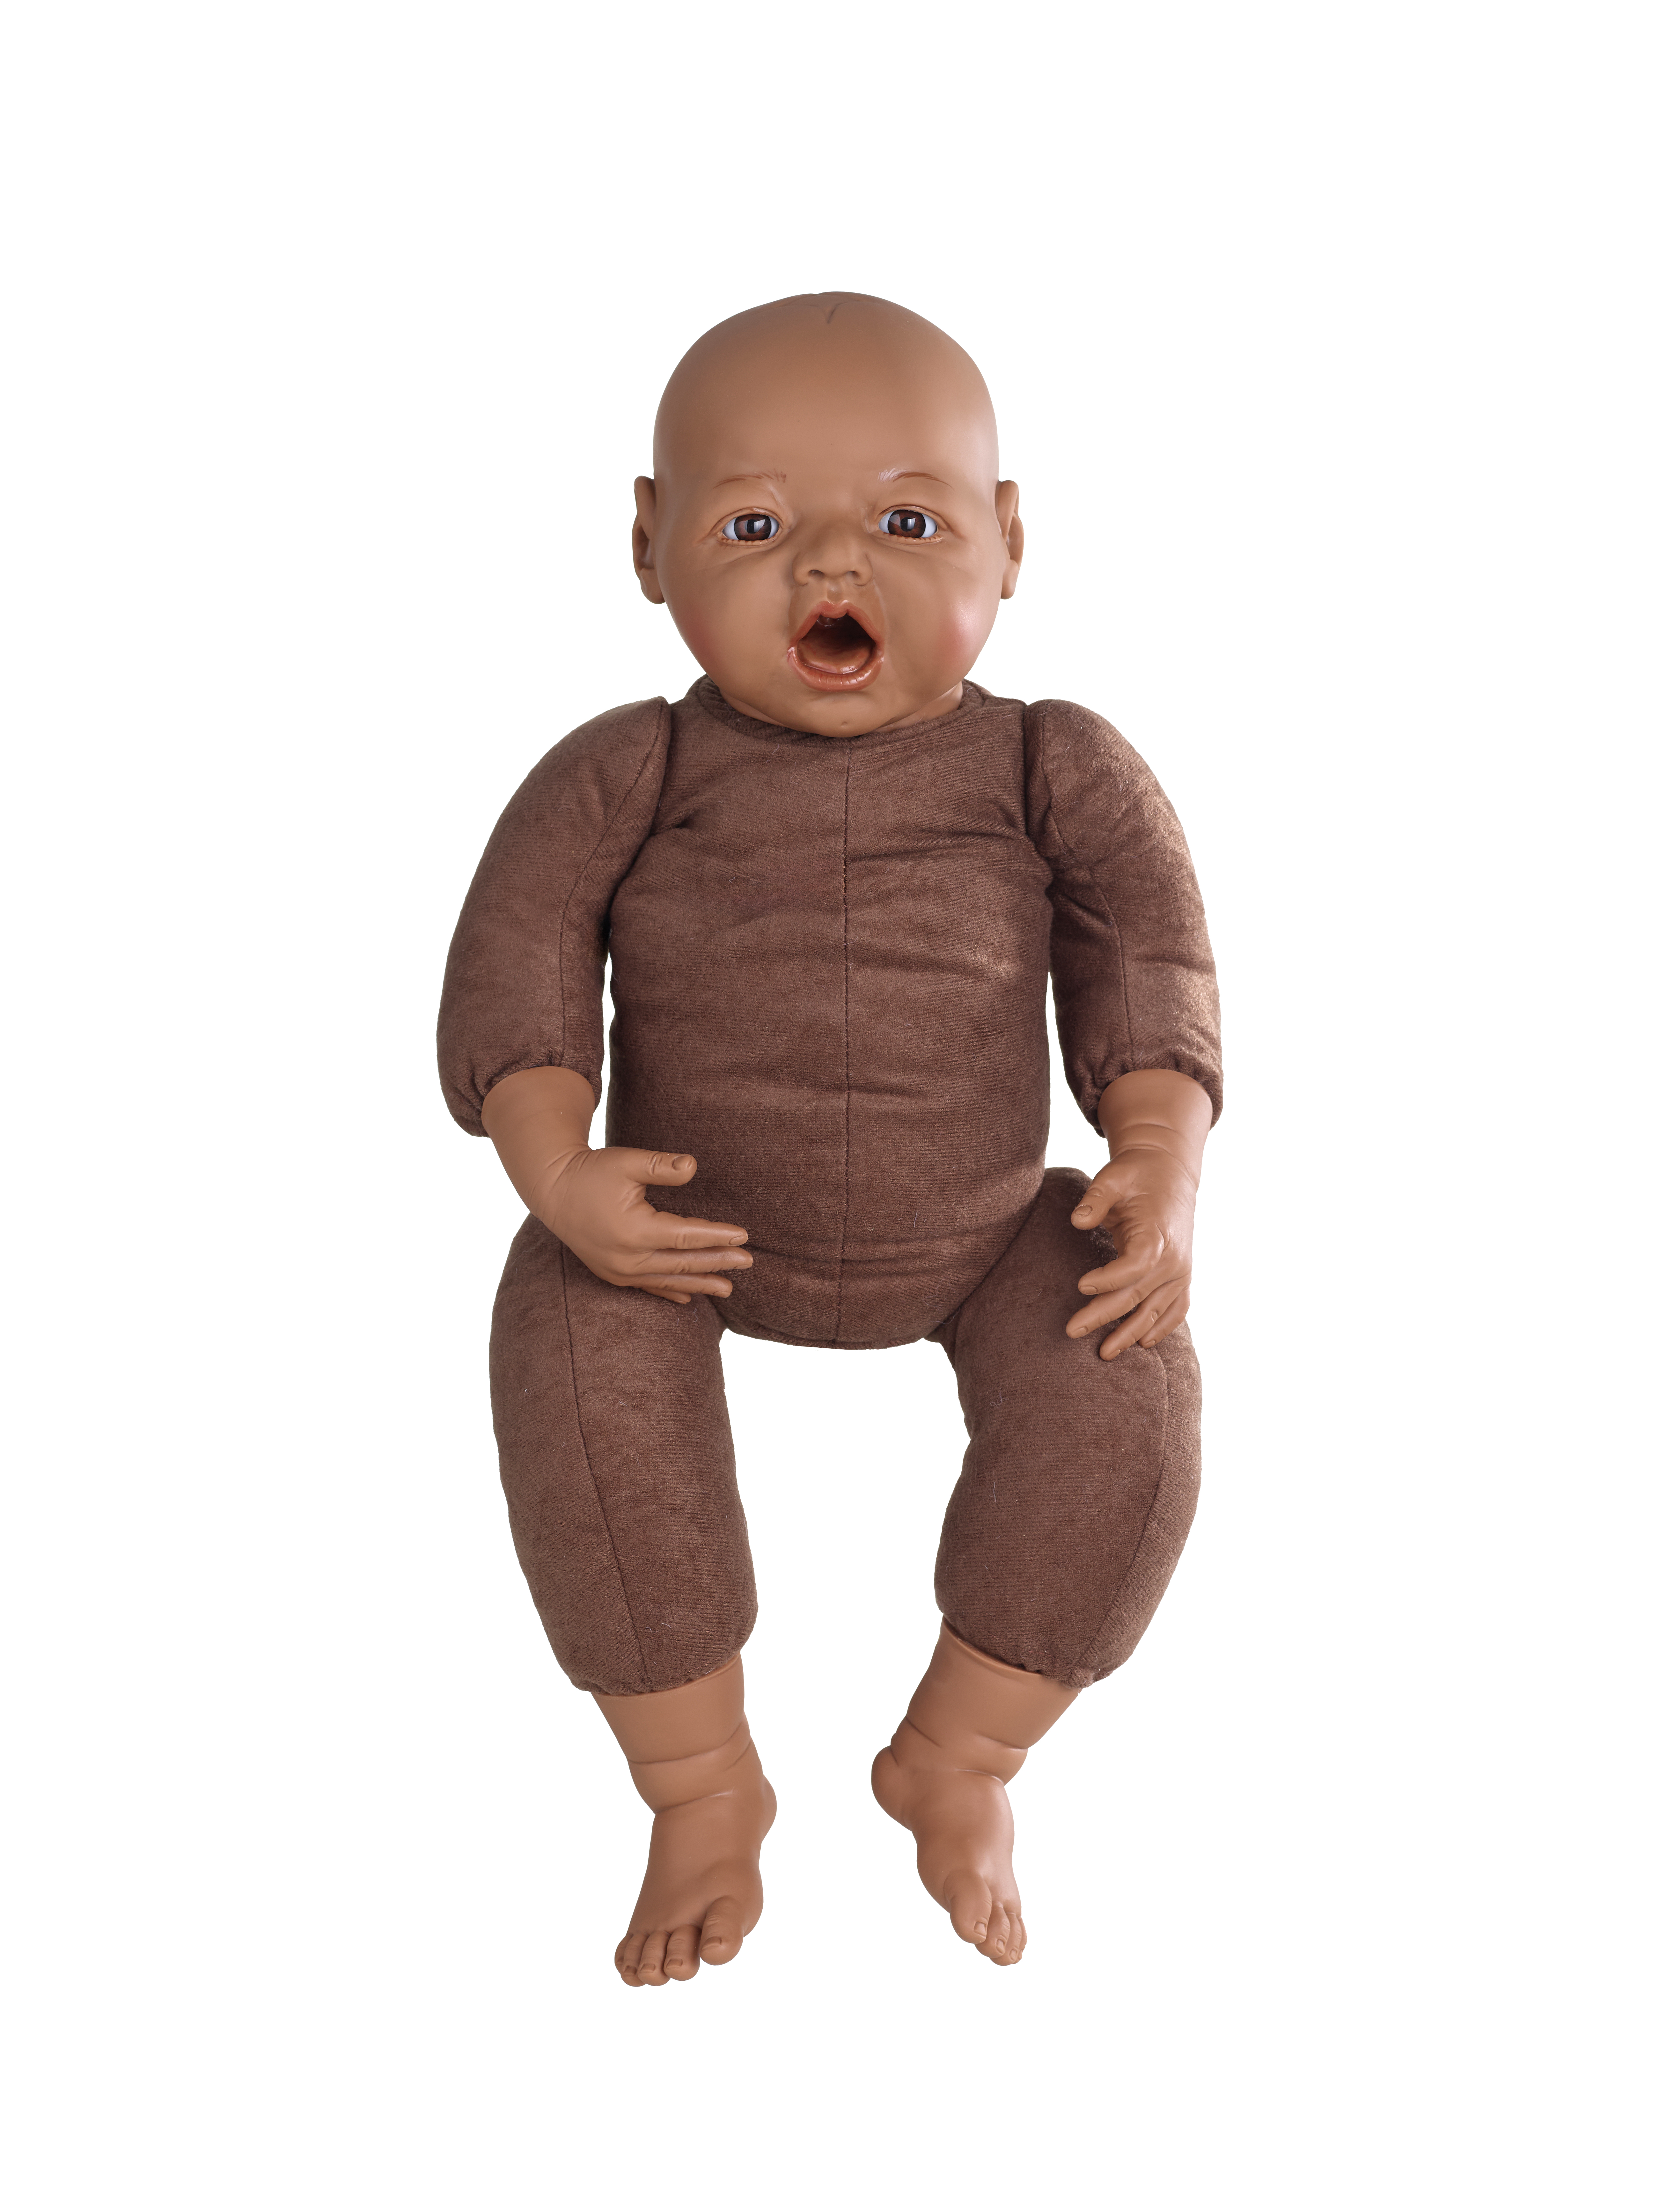 No 45 Rosaly - preemie baby doll with sutures 